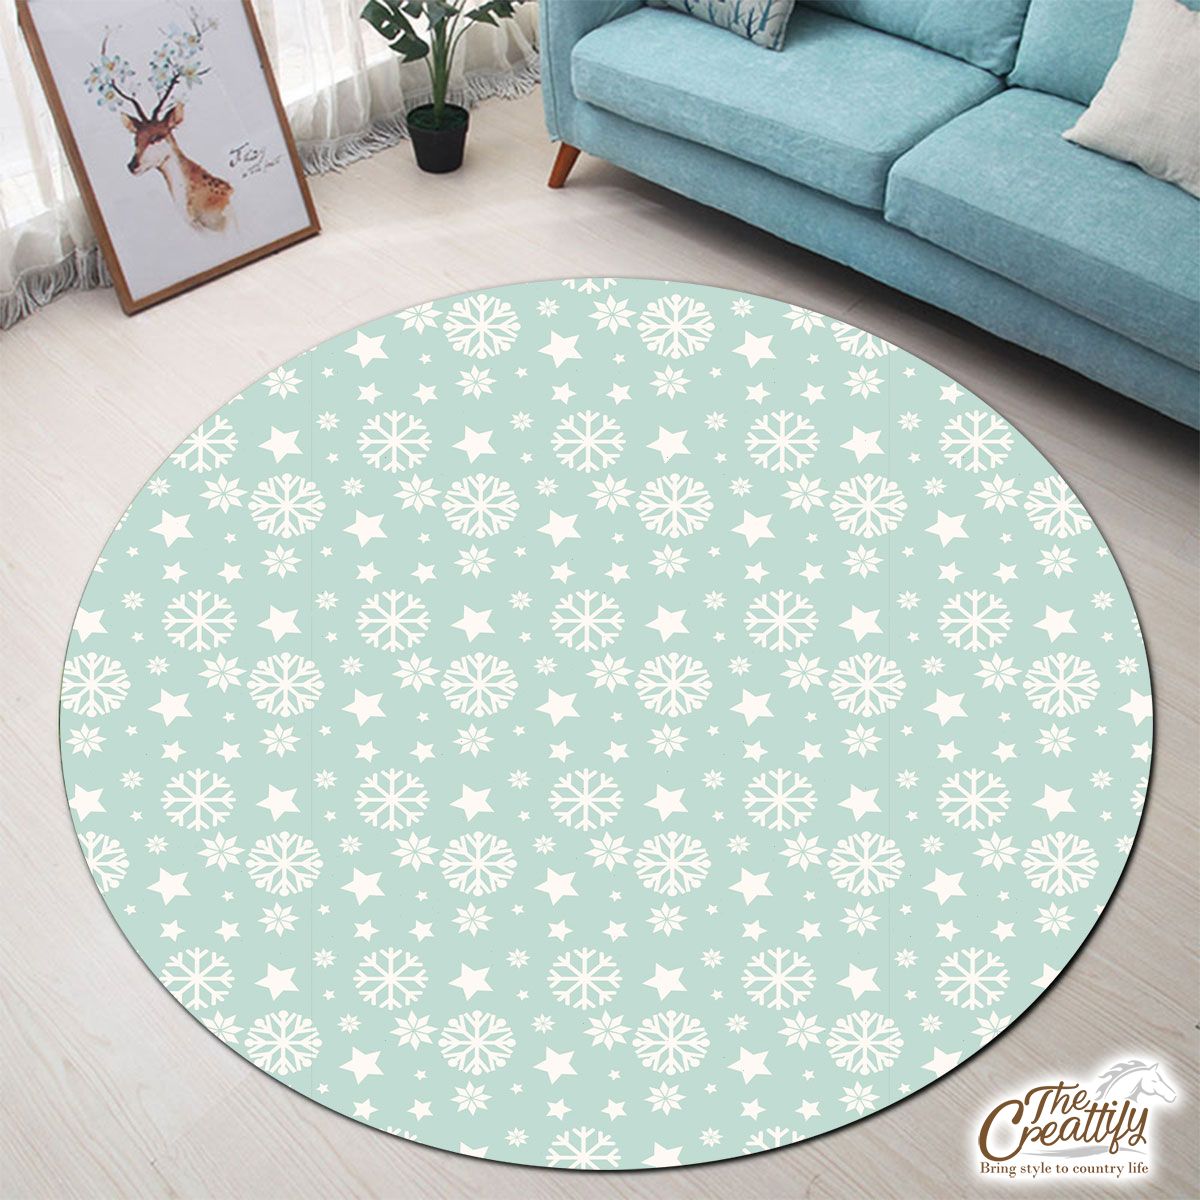 White And Light Green Snowflake And Christmas Stars Round Carpet